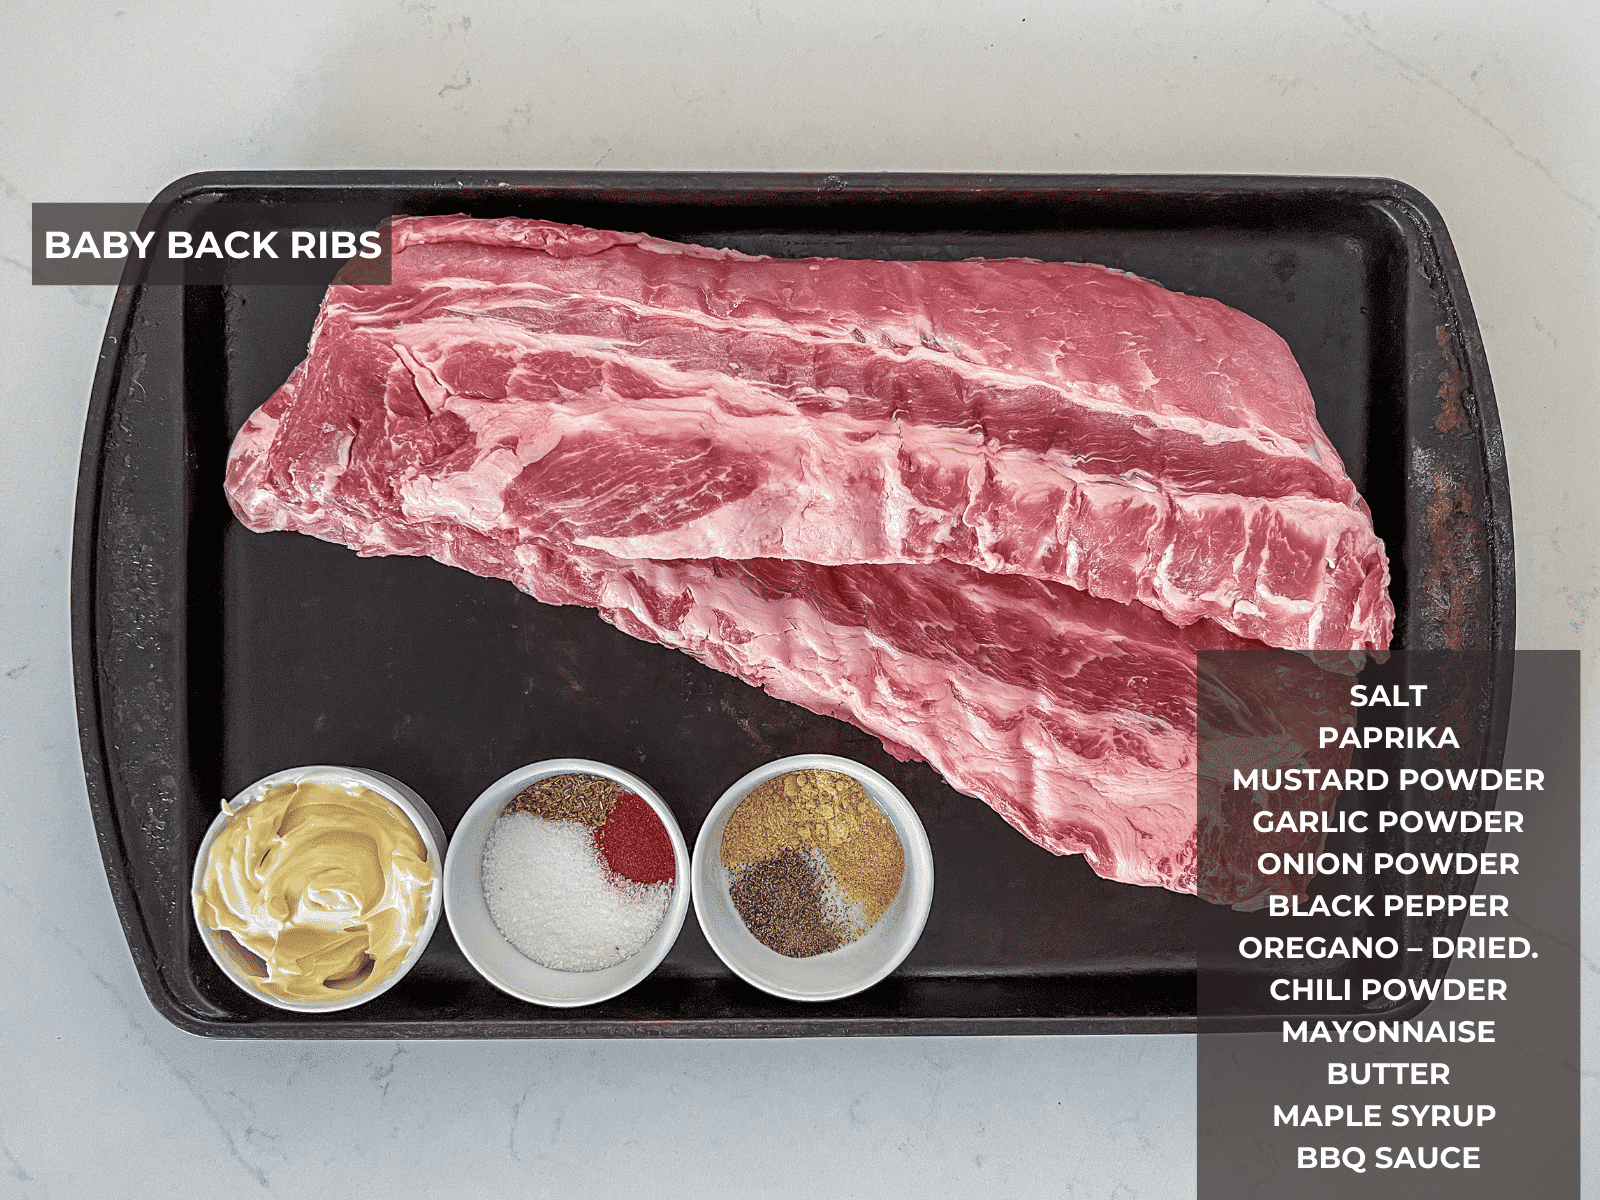 Ingredients for baby back ribs set out on a baking sheet.